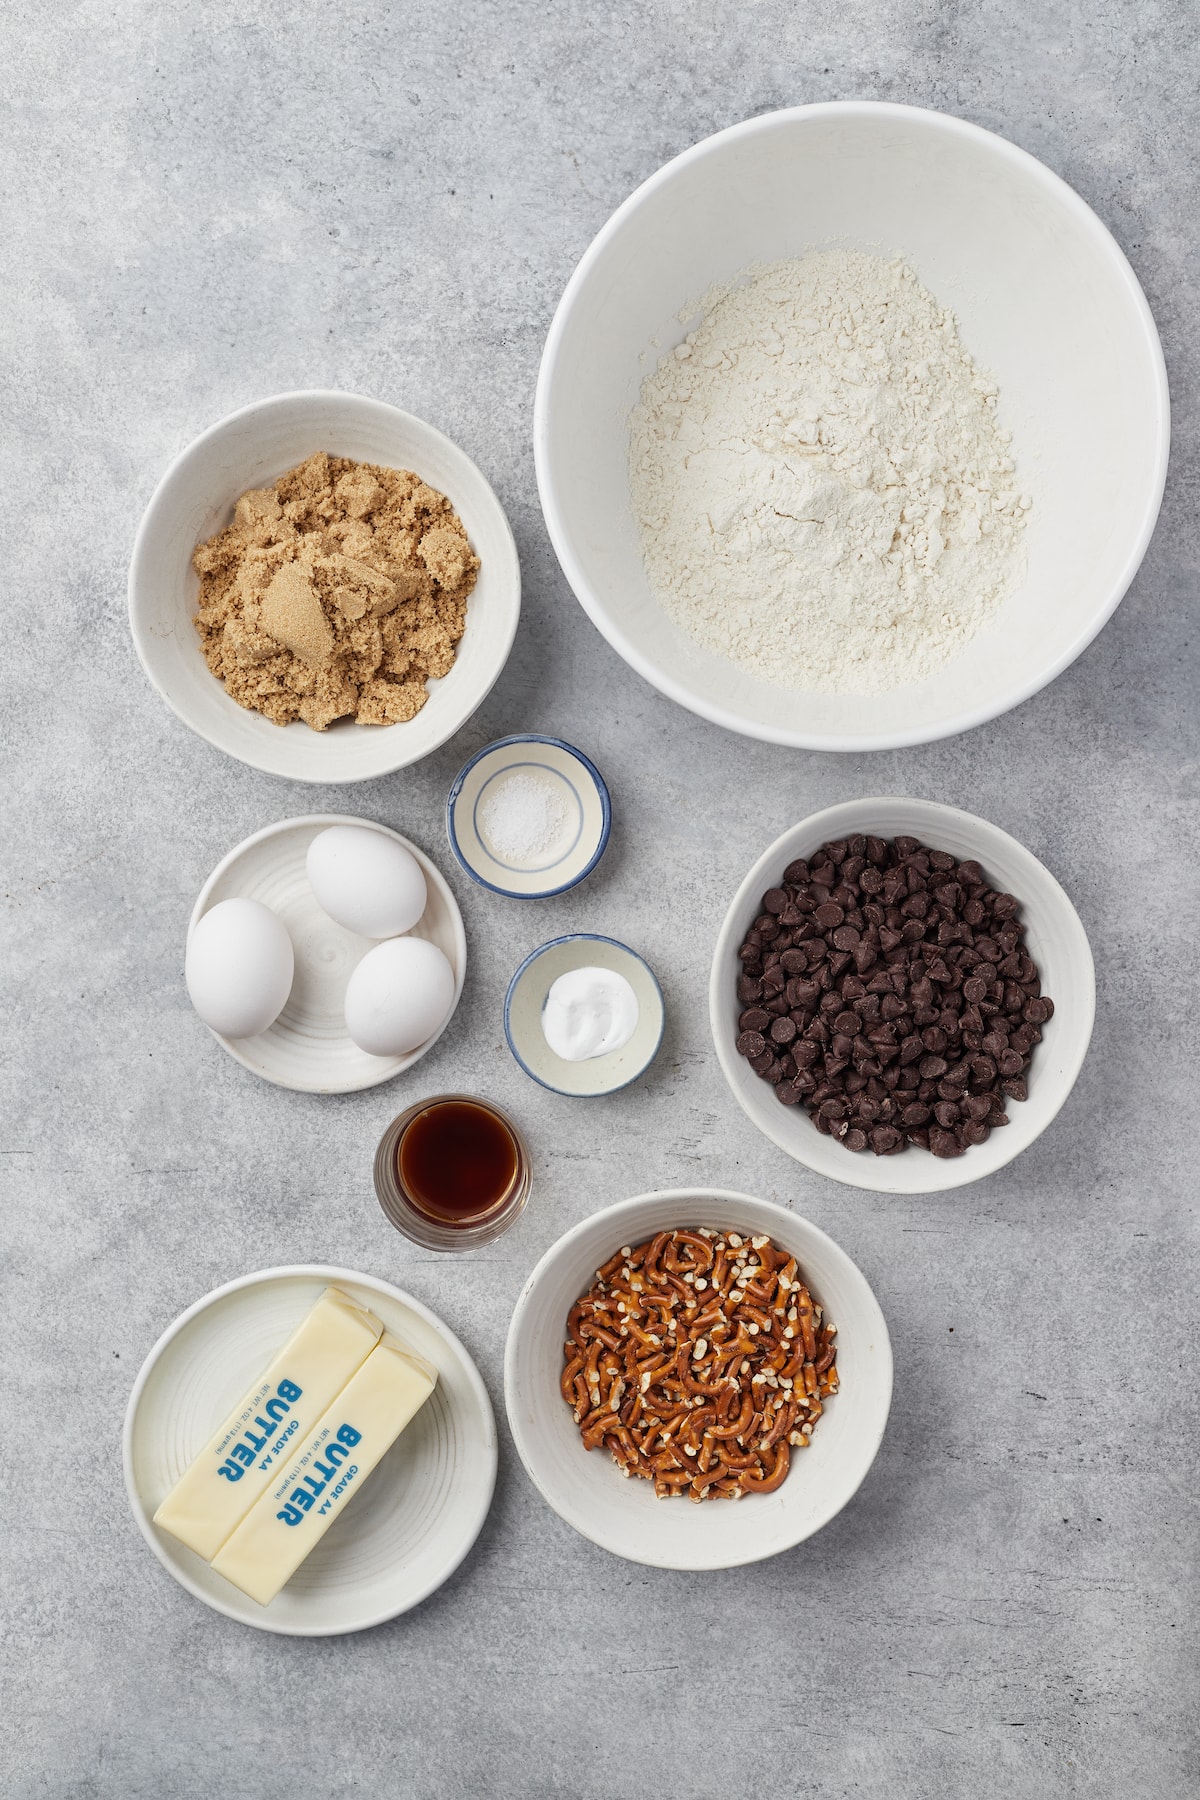 The ingredients for salty pretzel chocolate chip cookies.